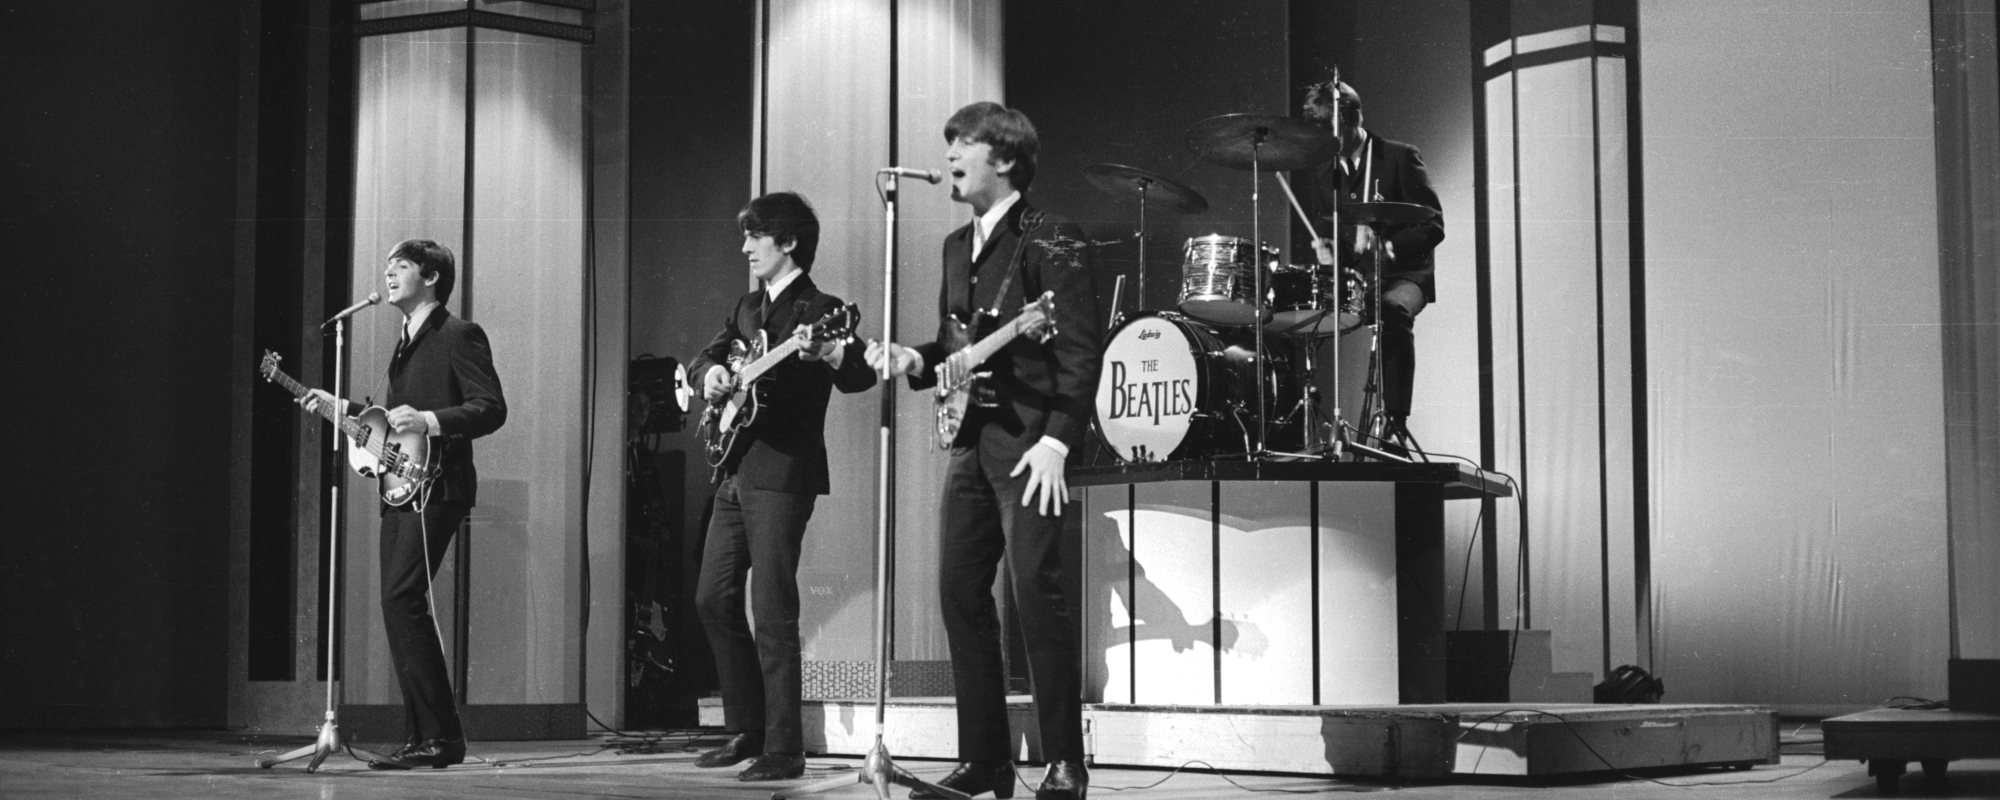 The Meaning Behind “If I Fell” by The Beatles and Why It’s One of Their Finest Ballads